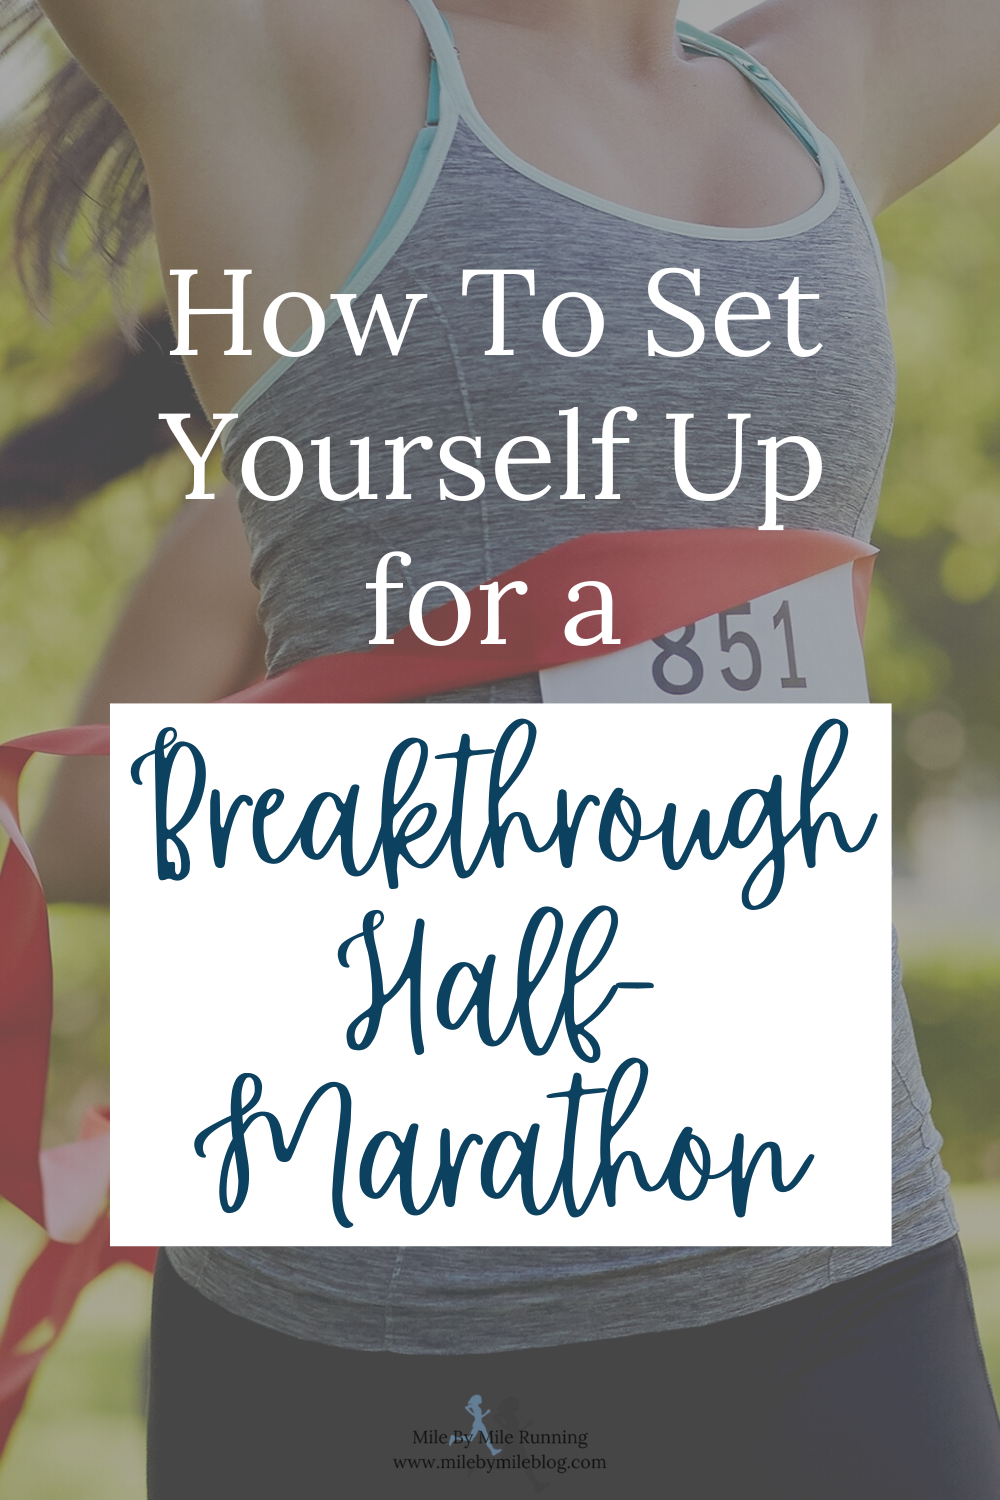 If you have been stuck running close to the same race times in the half-marathon for a long time you may be close to having a breakthrough race. This is when you see a huge jump in your race time or a significant PR that you have been working towards. There are some ways to set yourself up for a breakthrough half-marathon race to increase your chances of reaching your goals.